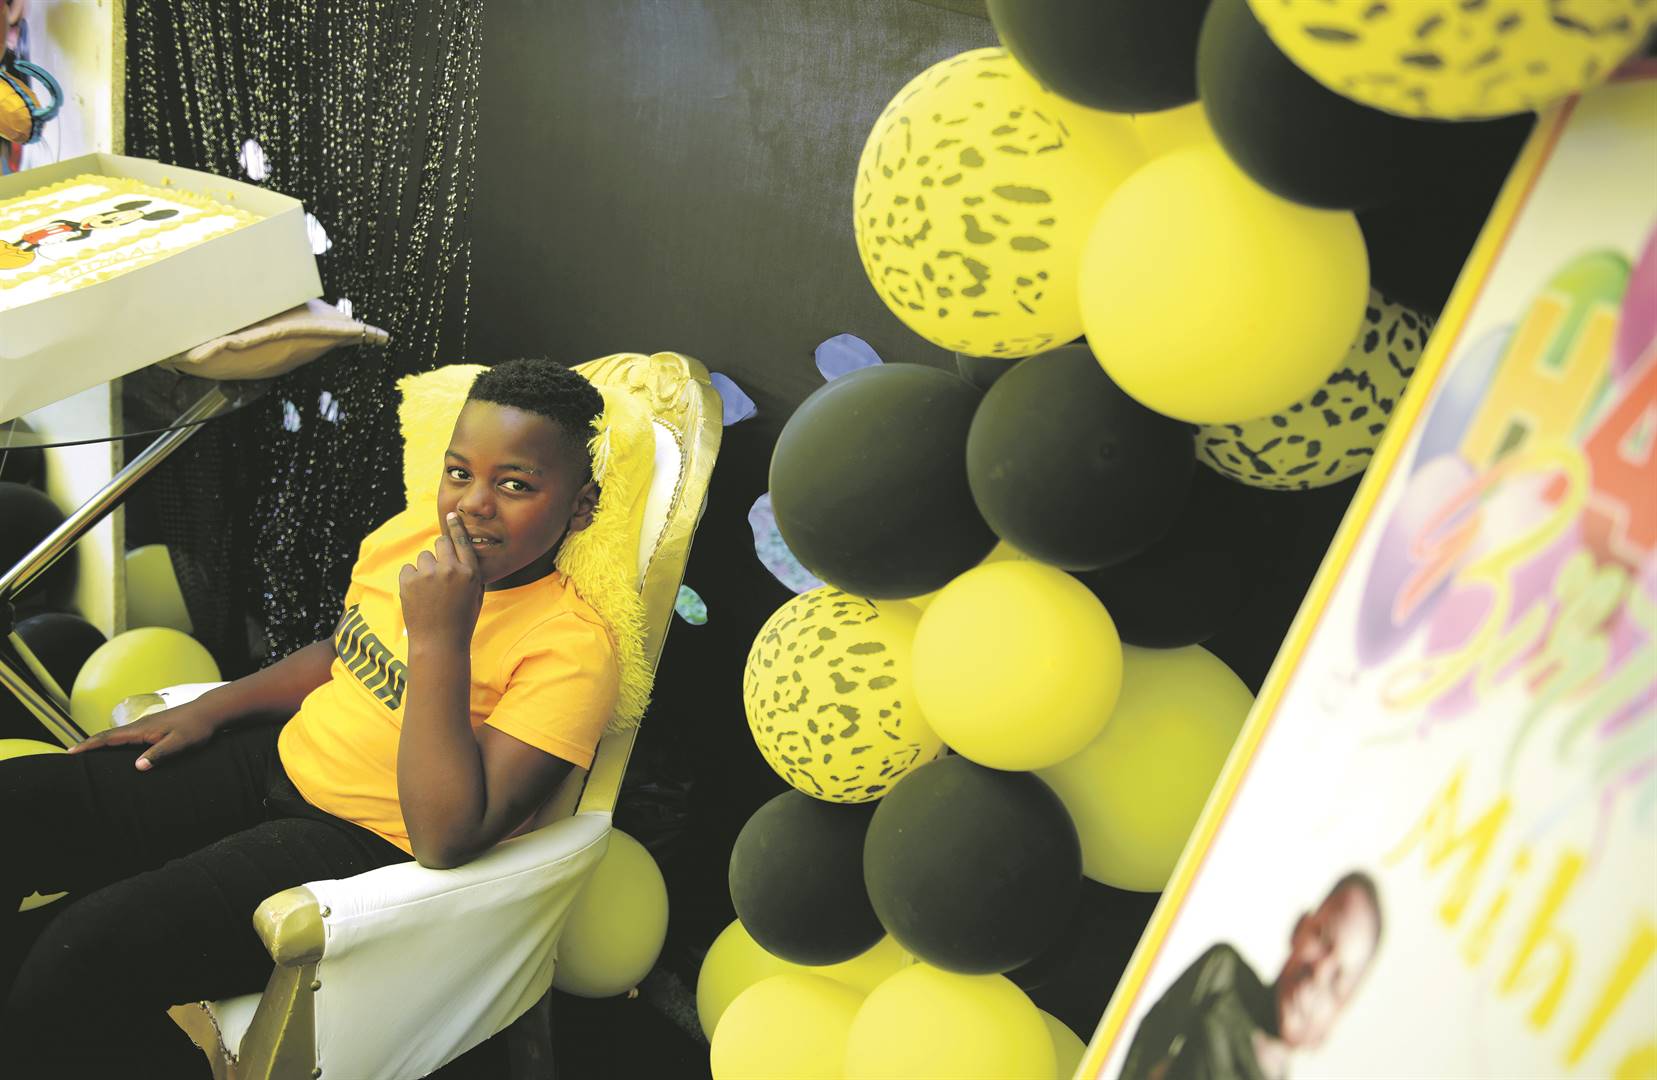 Mihle celebrated his 10th birthday last Saturday, shortly before the 10th anniversary of the death of his father, who was killed during the Marikana massacre in 2012. Photo: Tebogo Letsie